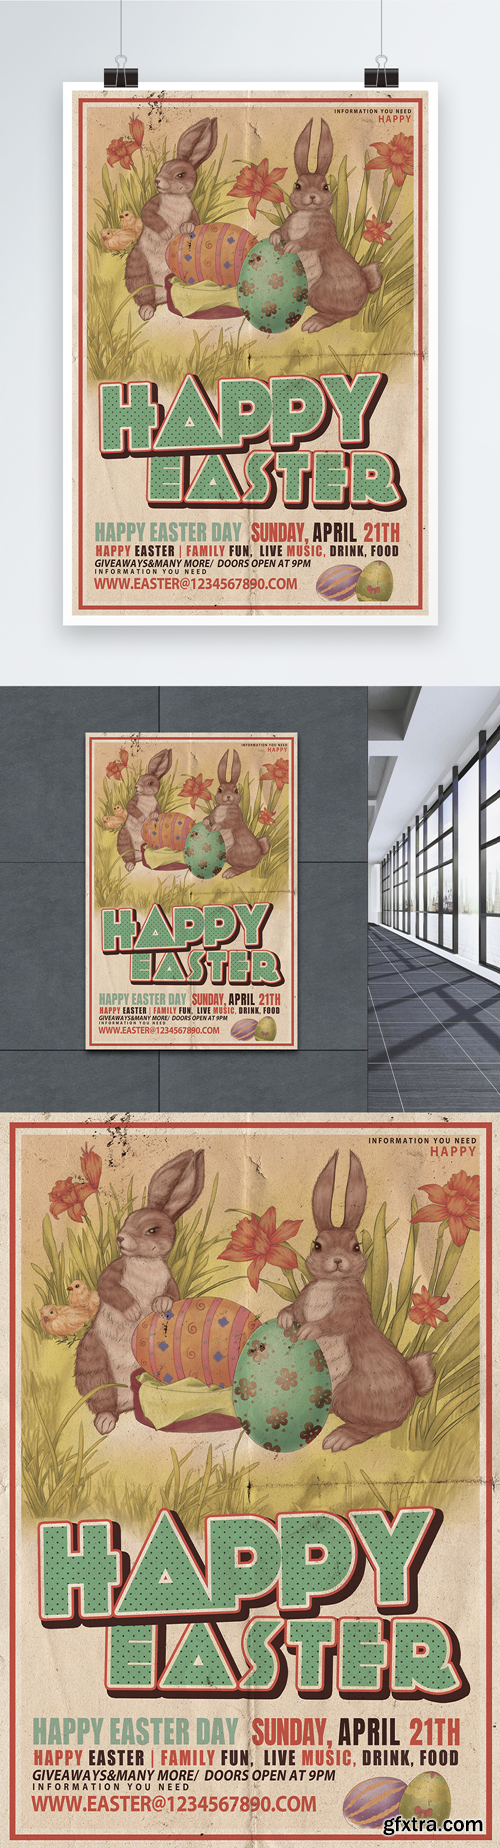 retro easter posters